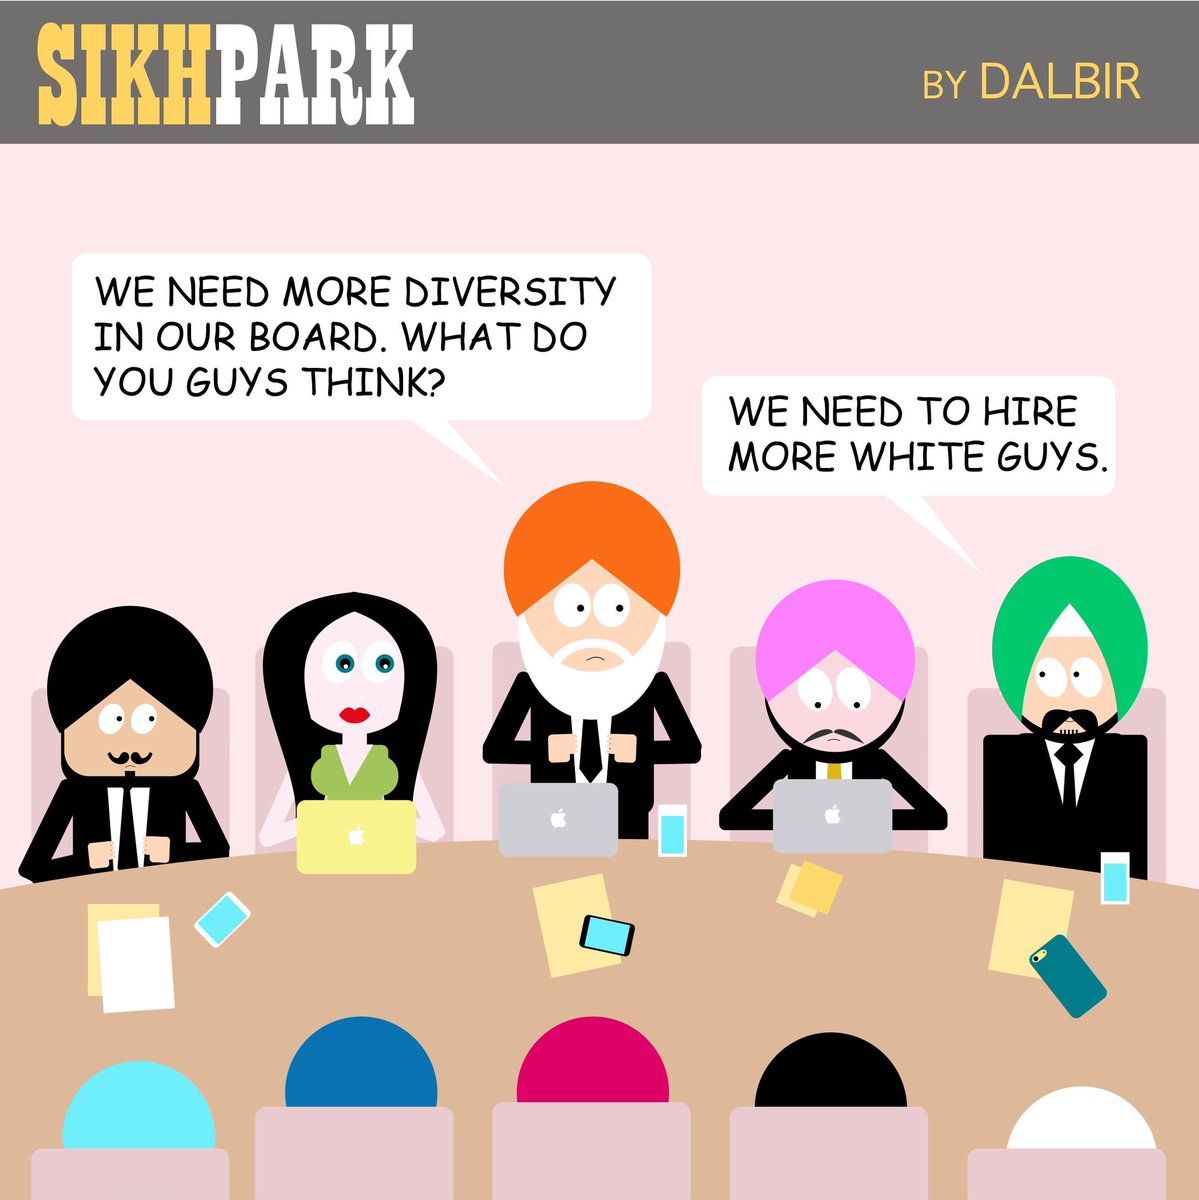 Equal opportunity for all. #Diversity #DiversityandInclusion #Sikh #desicomic #sundayvibes #sunday